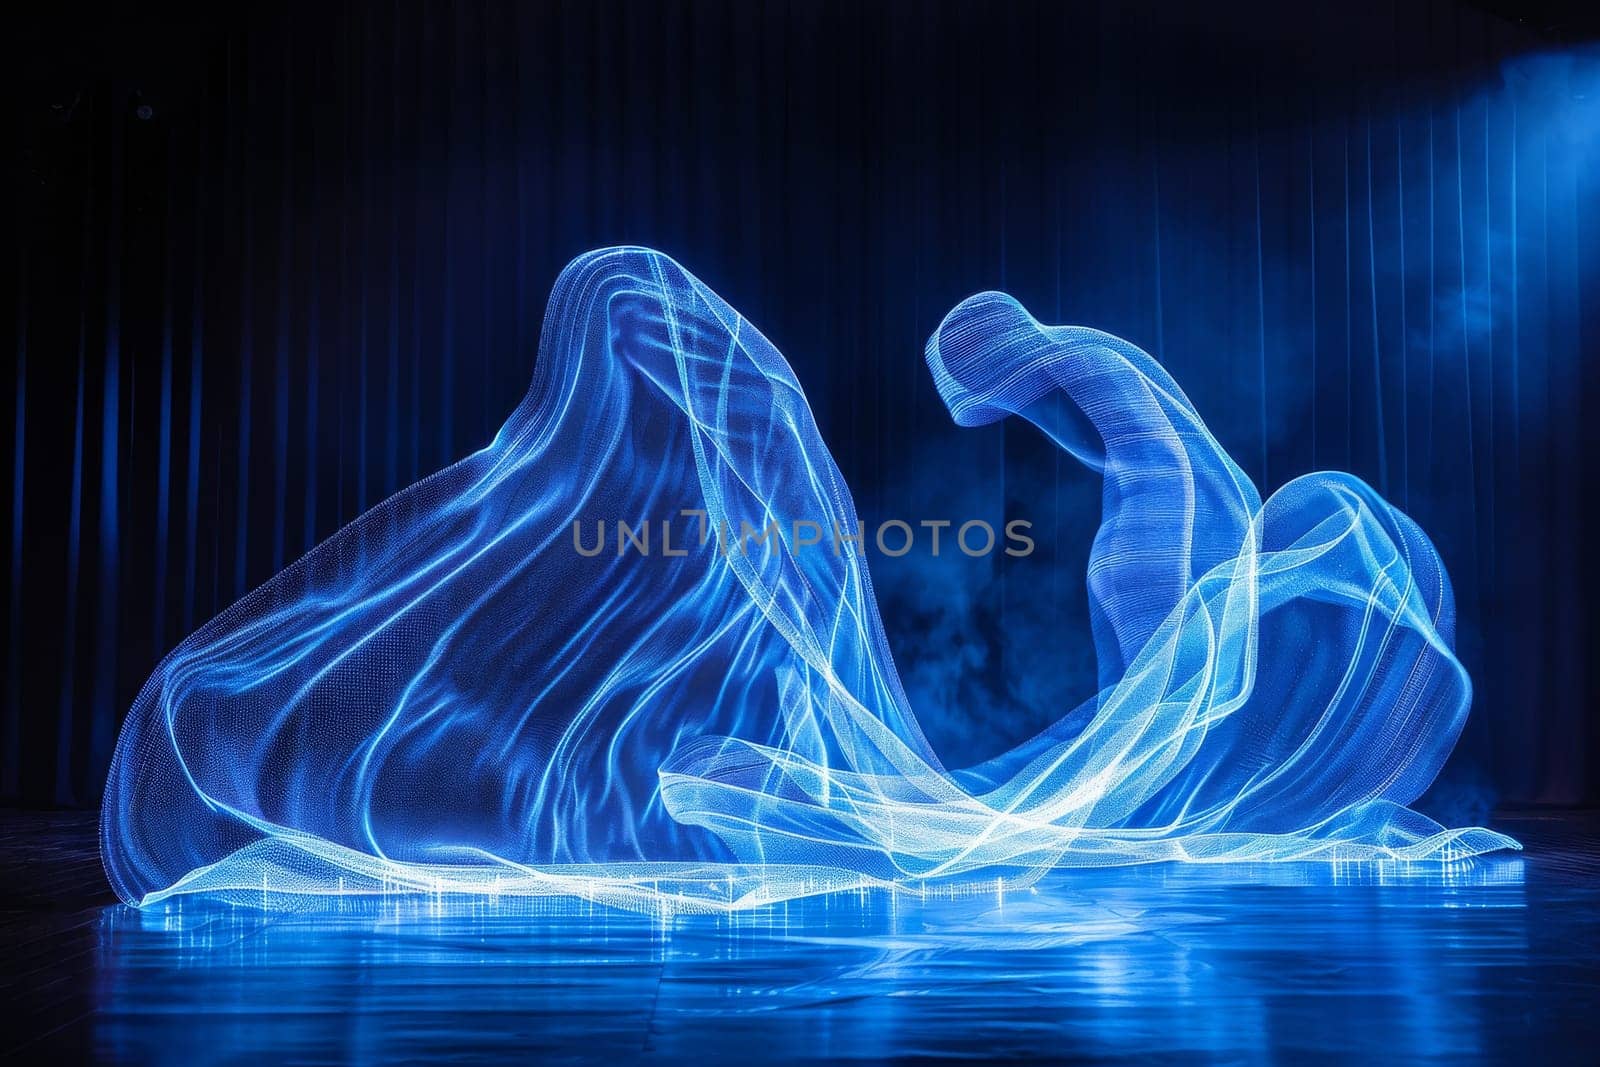 A blue wave of light is projected onto a dark background by itchaznong